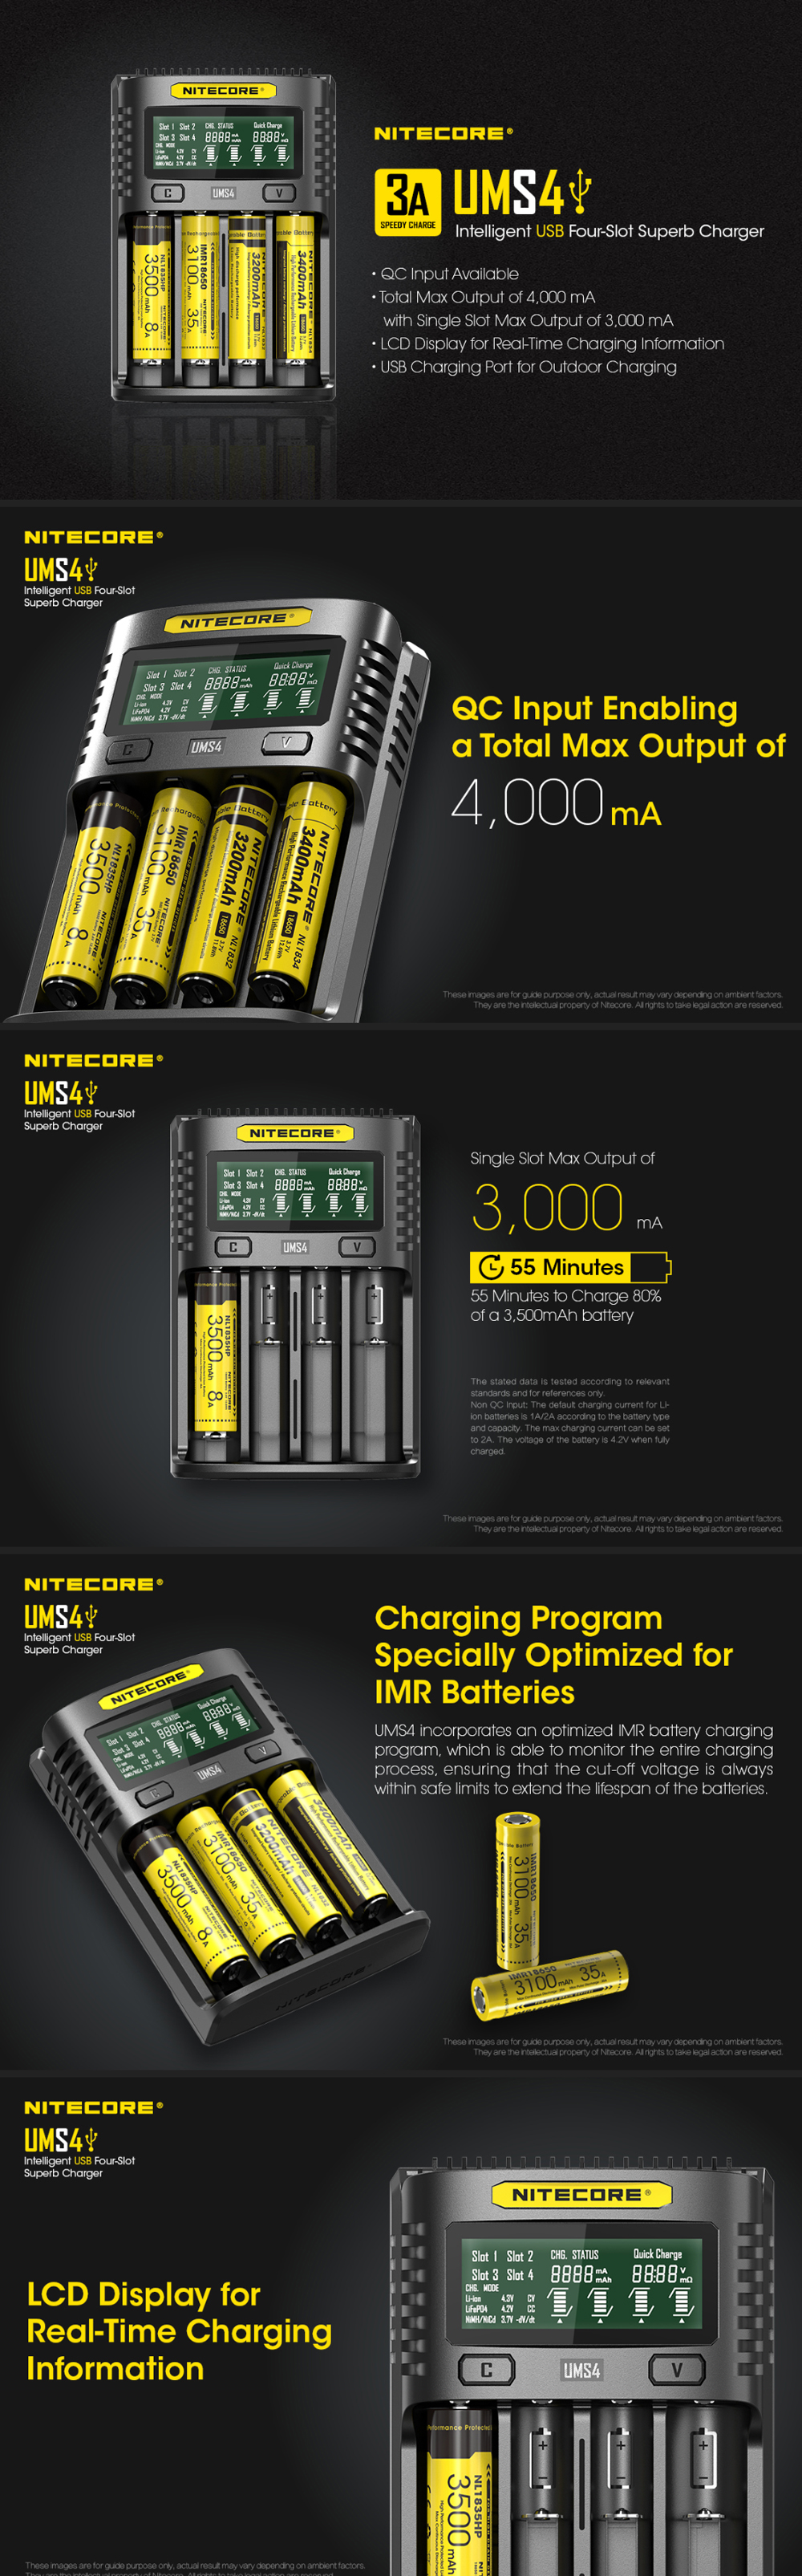 NITECORE UMS4 USB Battery Charger LCD Screen Smart Charging For 26650 18650 21700 UMS2 16340 18350